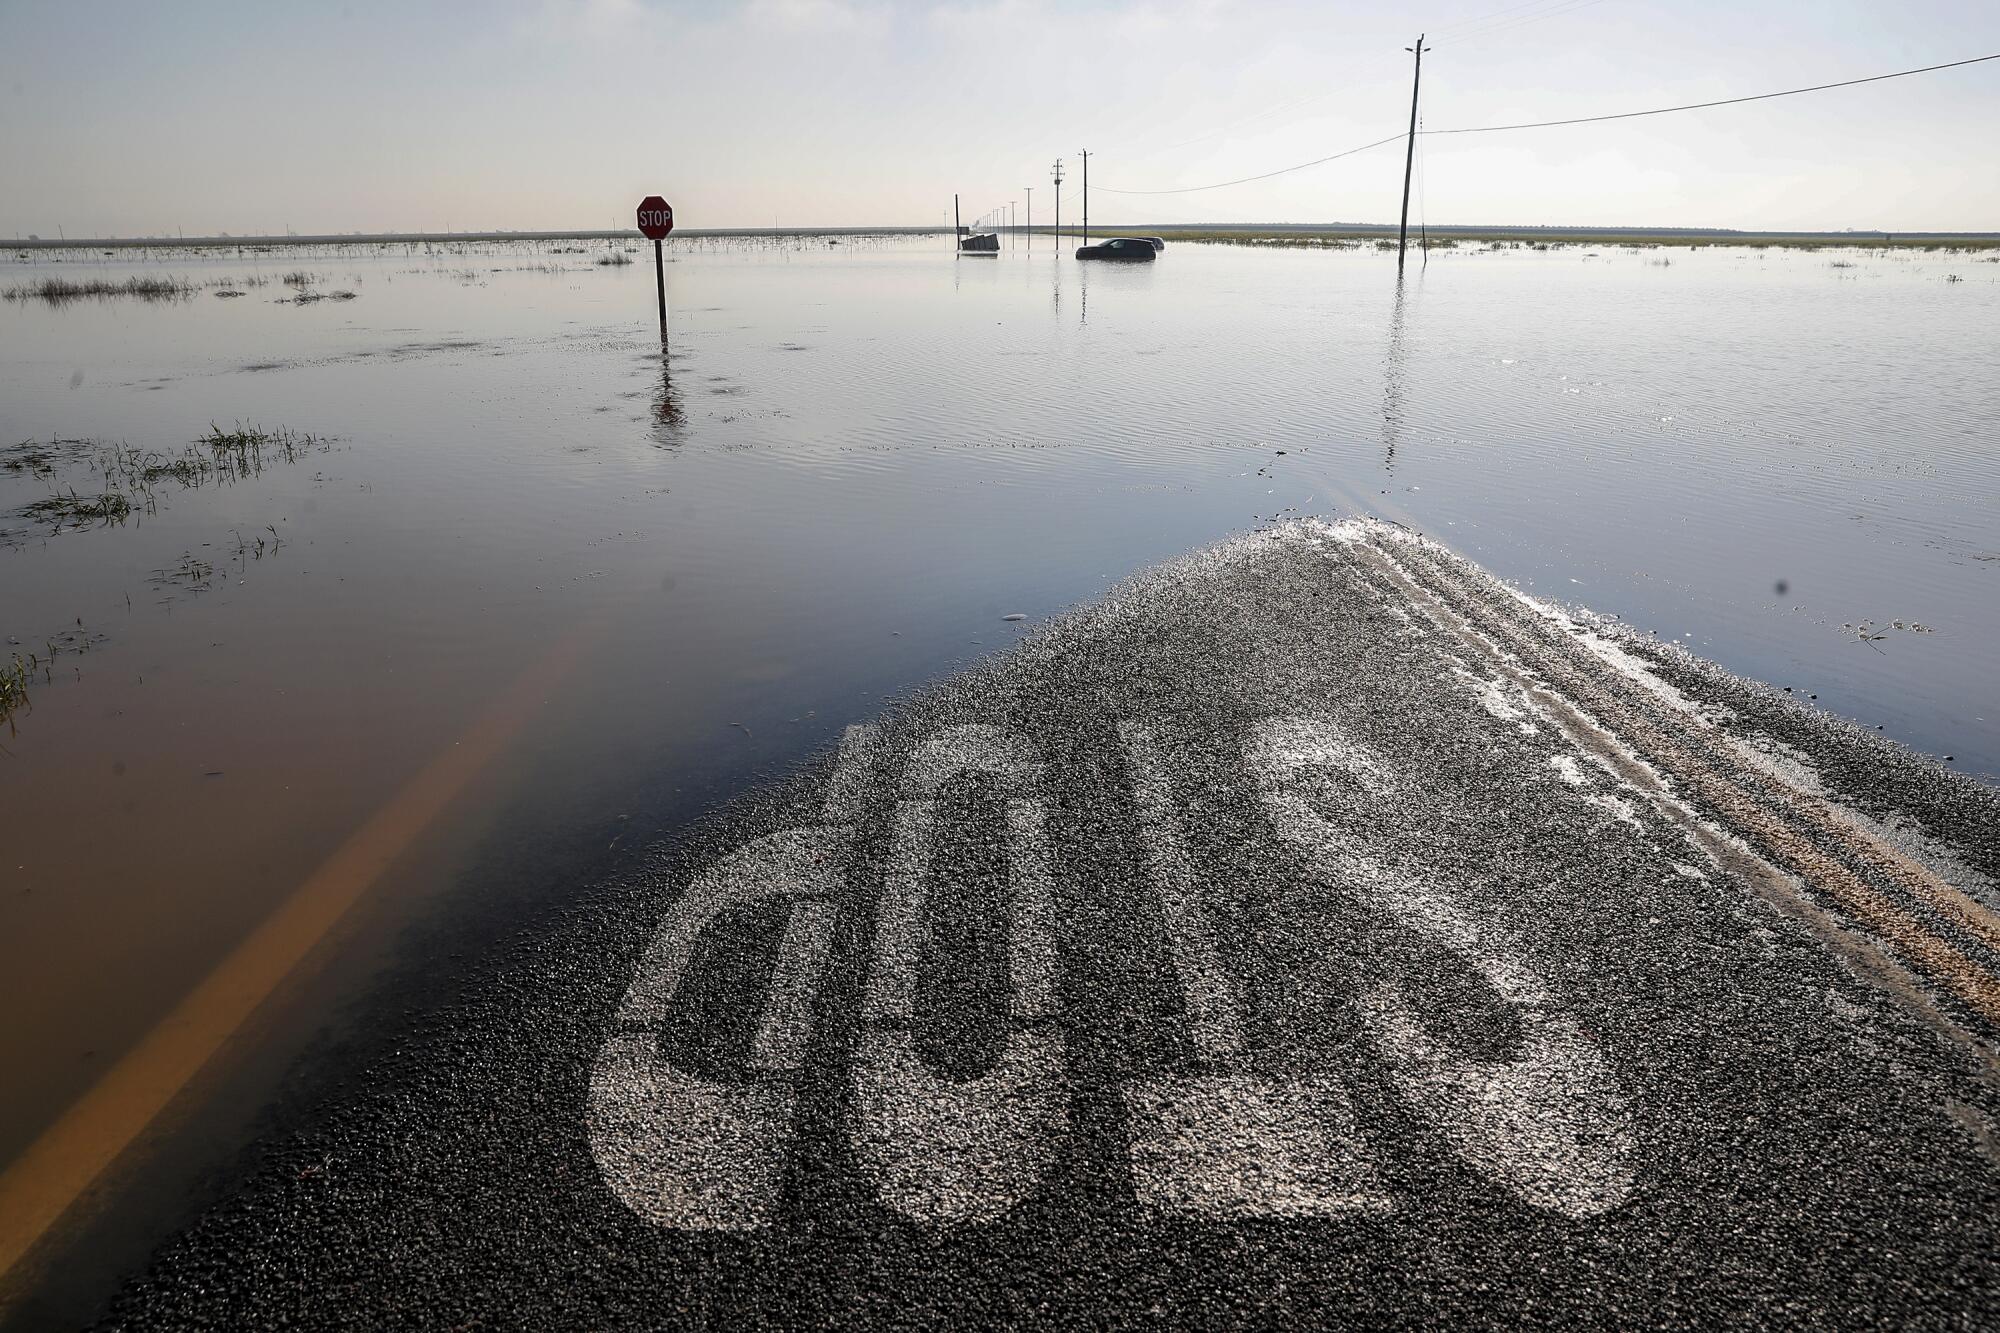 Floodwaters on a road rise up near the word "STOP" on asphalt. In the distance, vehicles are stopped in the water.